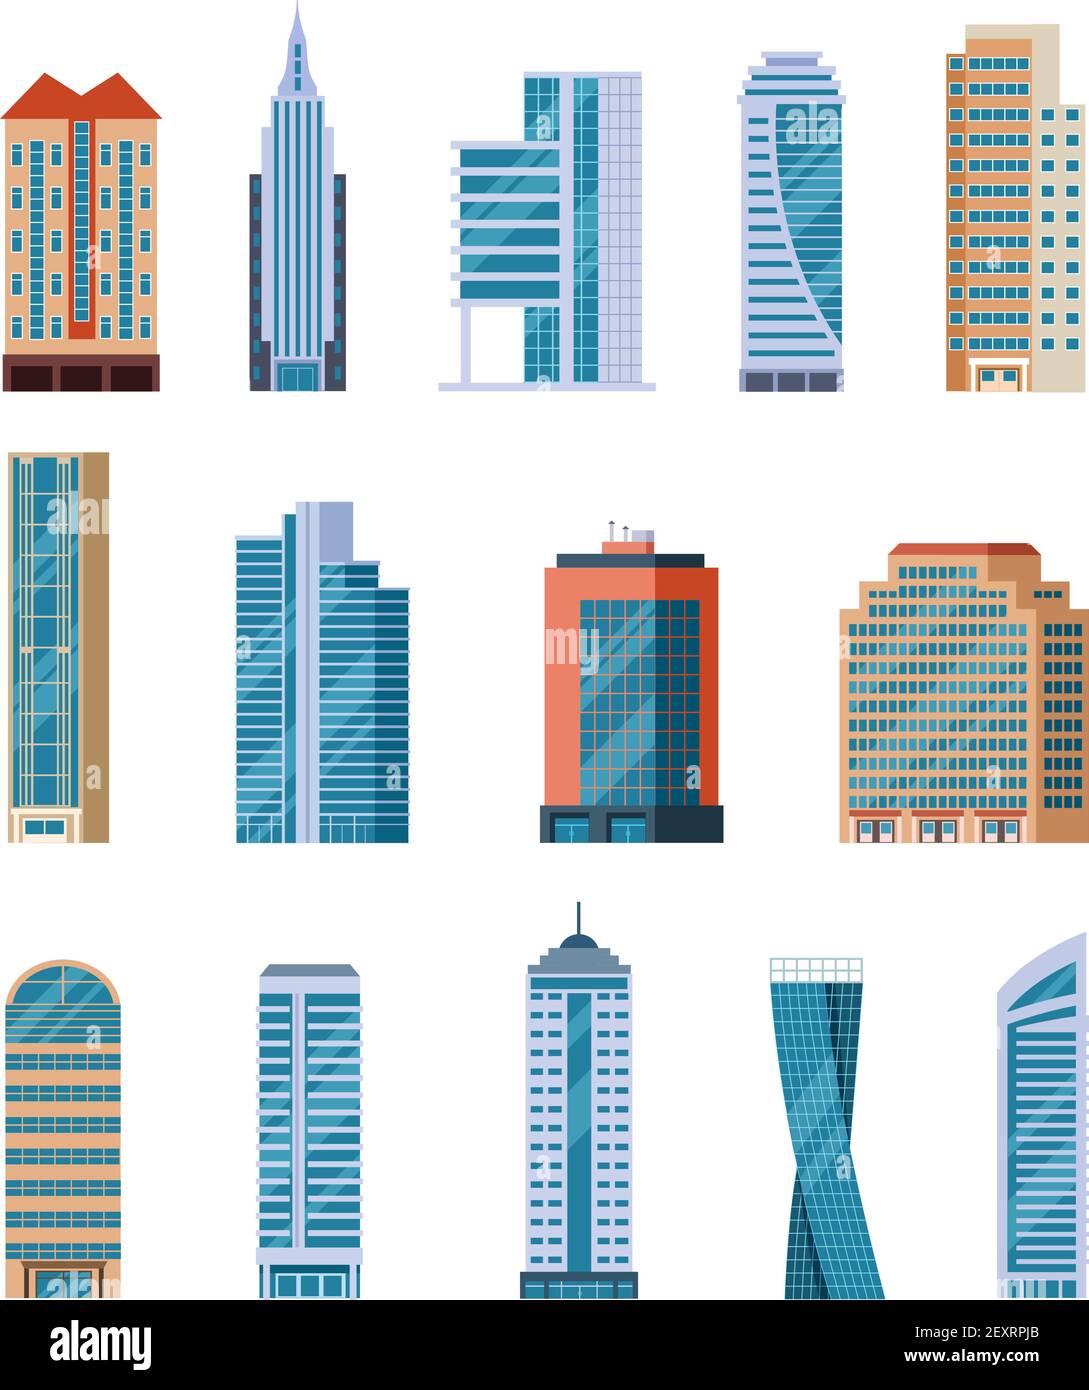 Flat skyscrapers. Modern city tall buildings. Residential and office houses exterior. Apartment blocks isolated cartoon vector set. Illustration skyscraper construction, tall building architecture Stock Vector